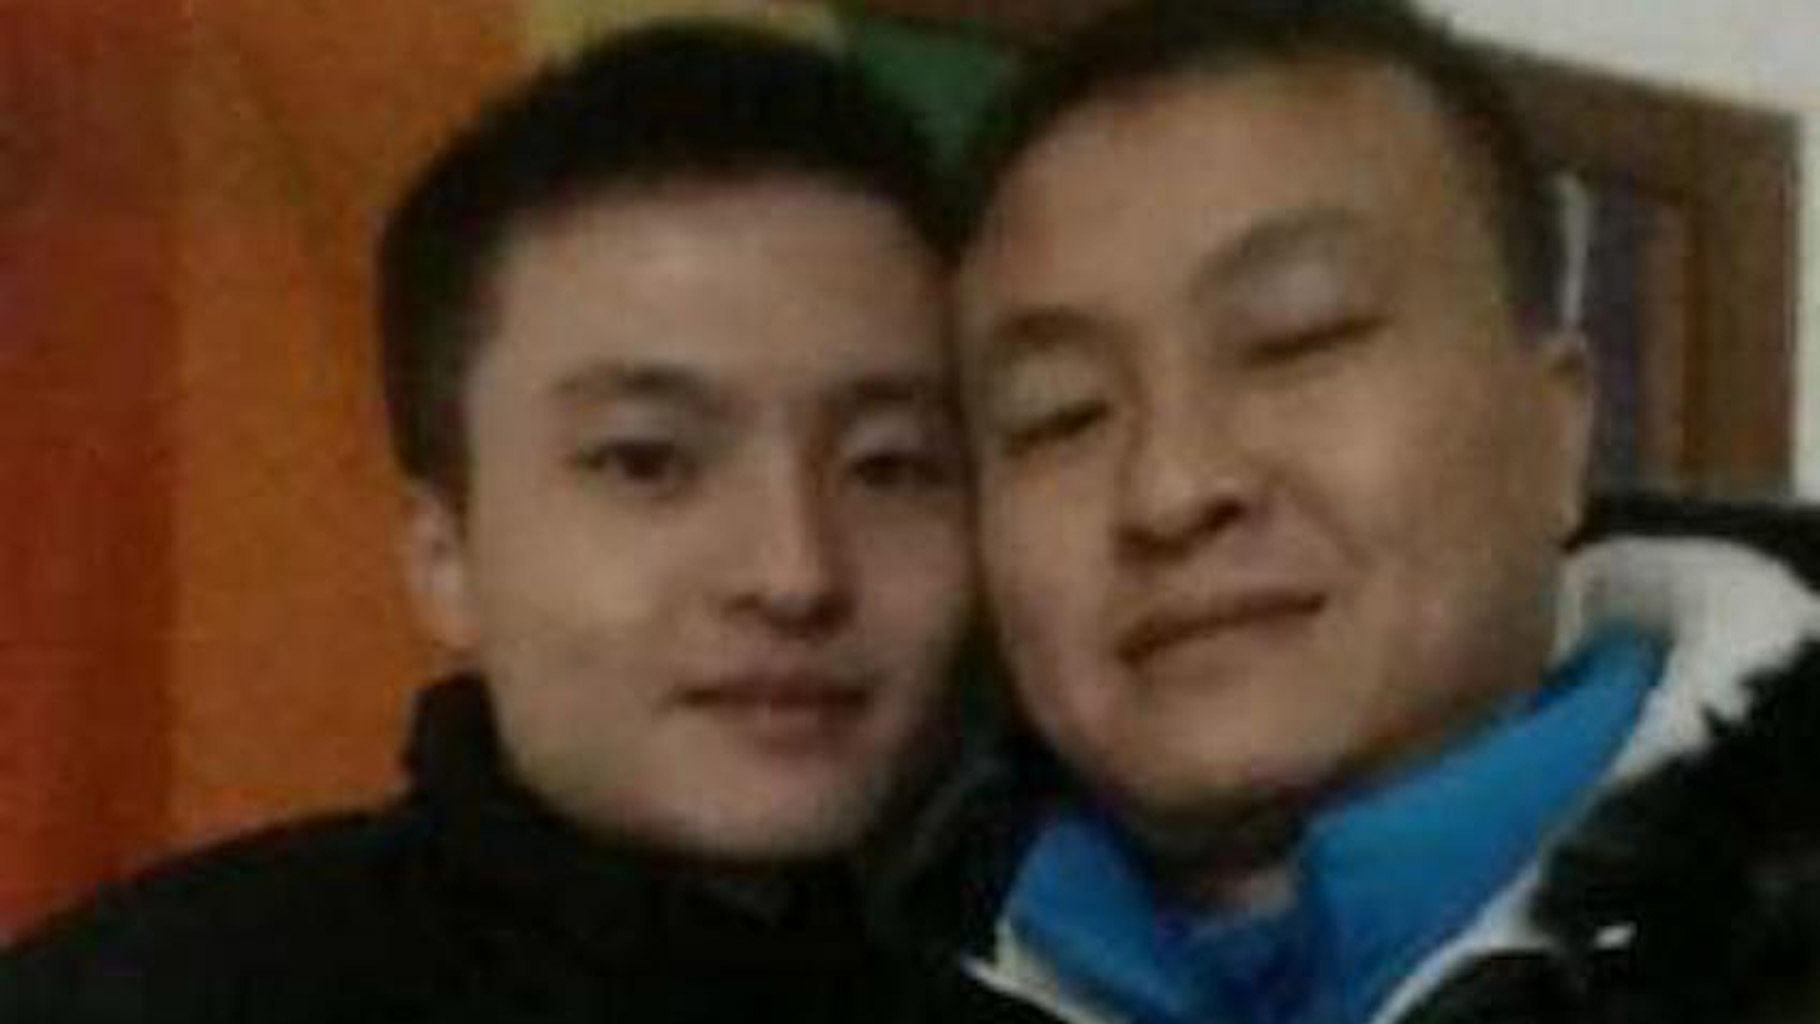 China’s first lawsuit on same-sex marriage rights has been accepted by a court. (Photo: <a href="http://m-maenner.de/2015/12/erster-chinese-klagt-auf-eheoeffnung/">Manner</a>)